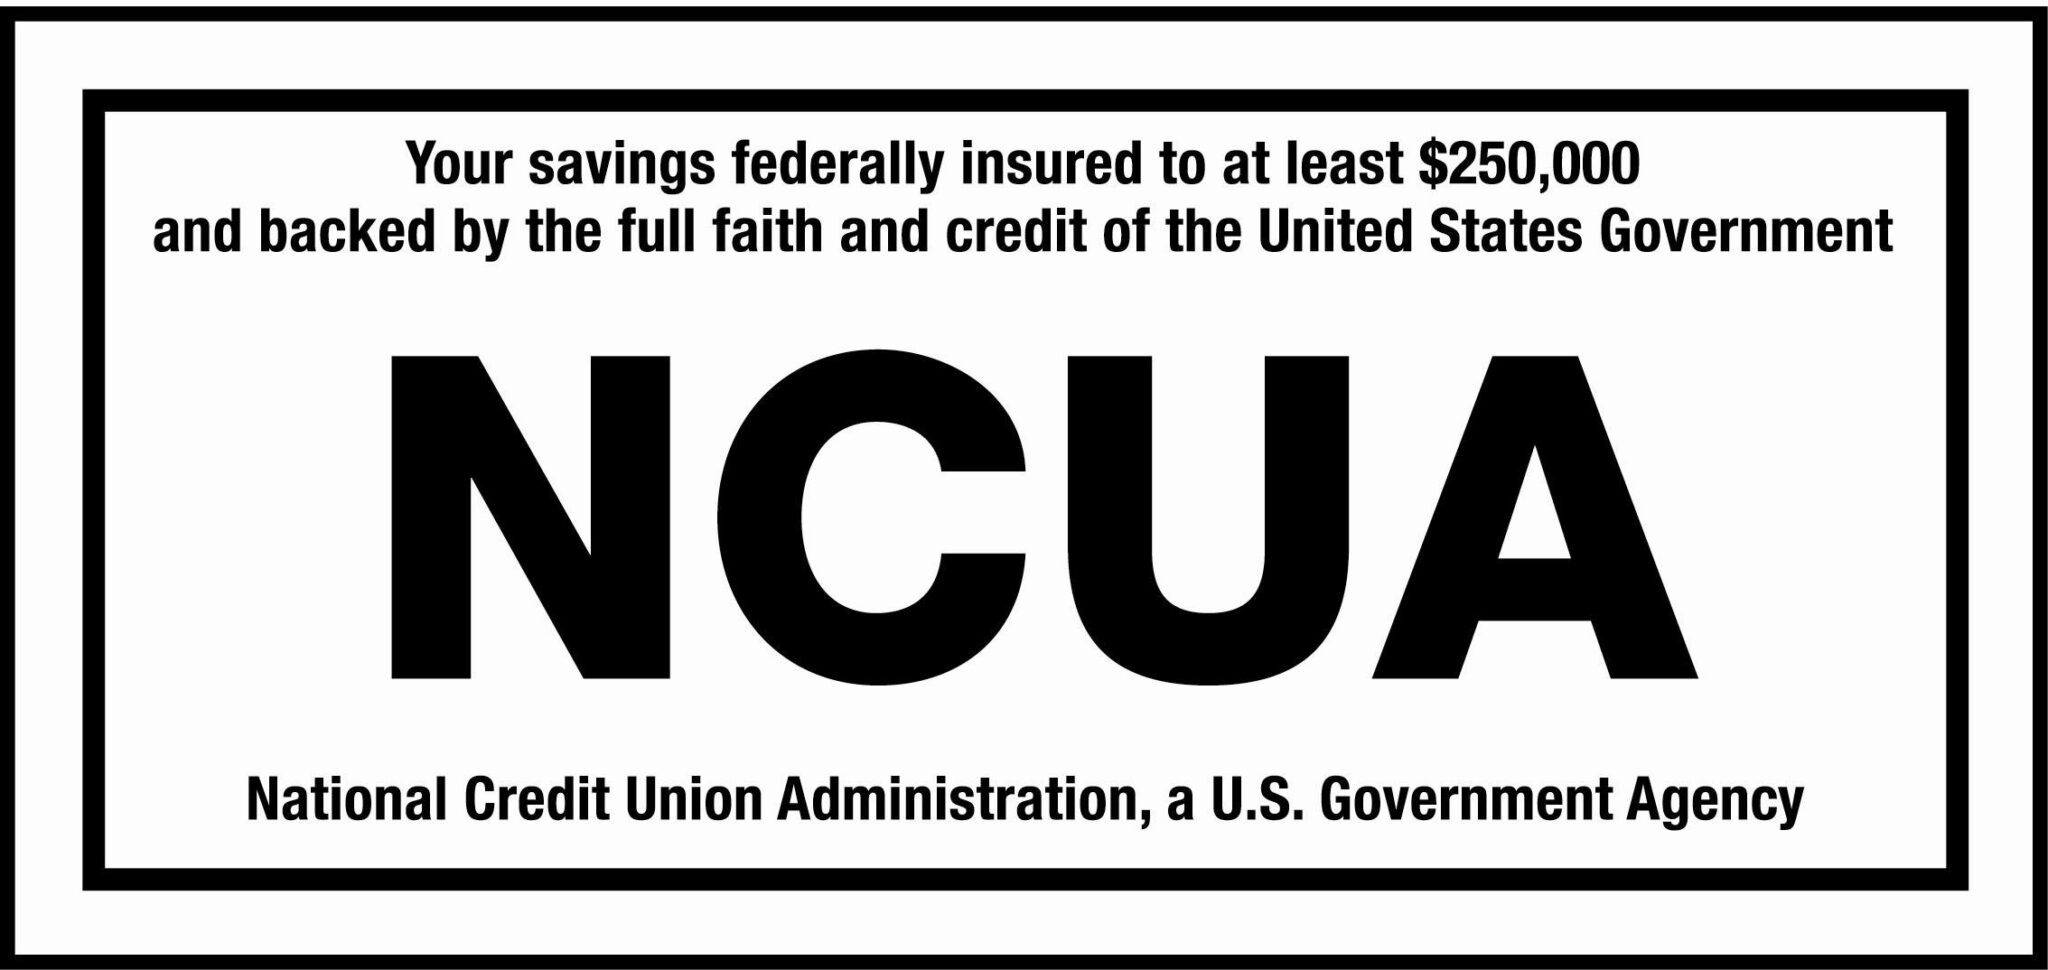 NCUA logo with text that reads "Your savings federally insured to at least $250,000 and backed by the full faith and credit of the United States Government NCUA National Credit Union Administration, a U.S. Government Agency"